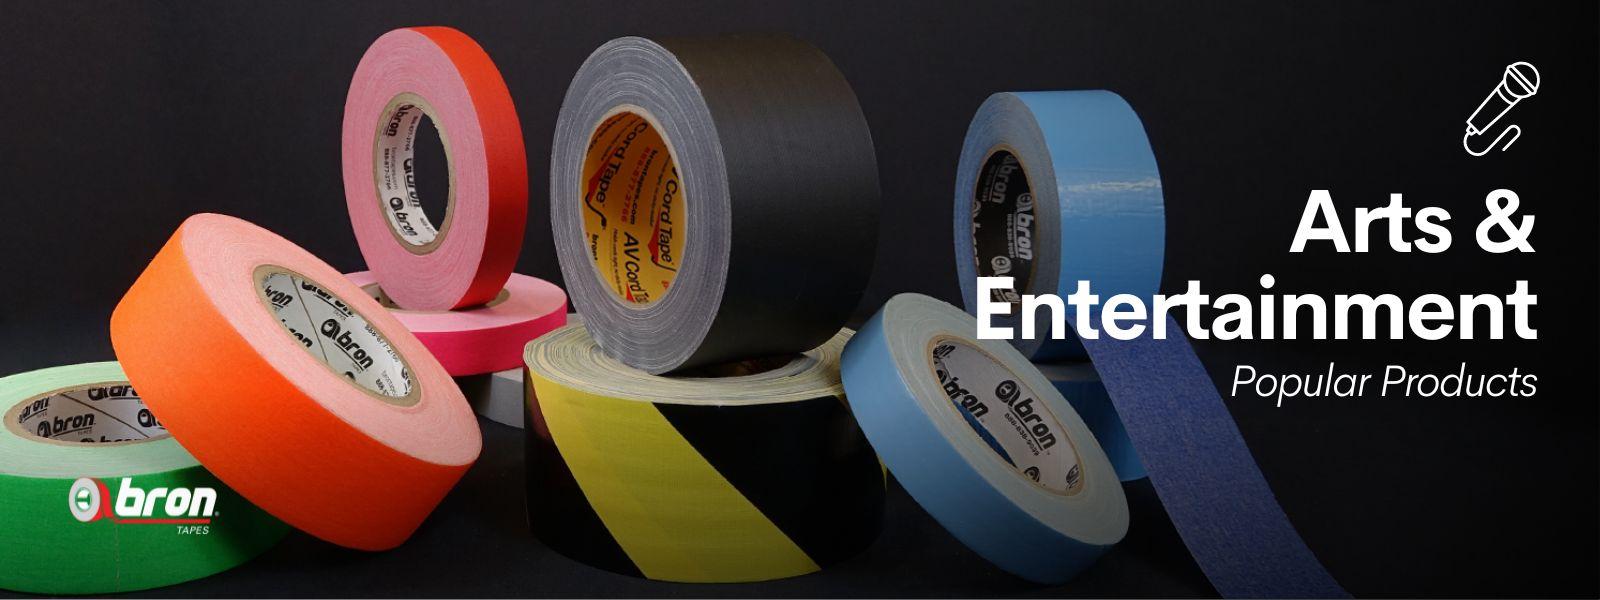 Tape products for the arts and entertainment industry